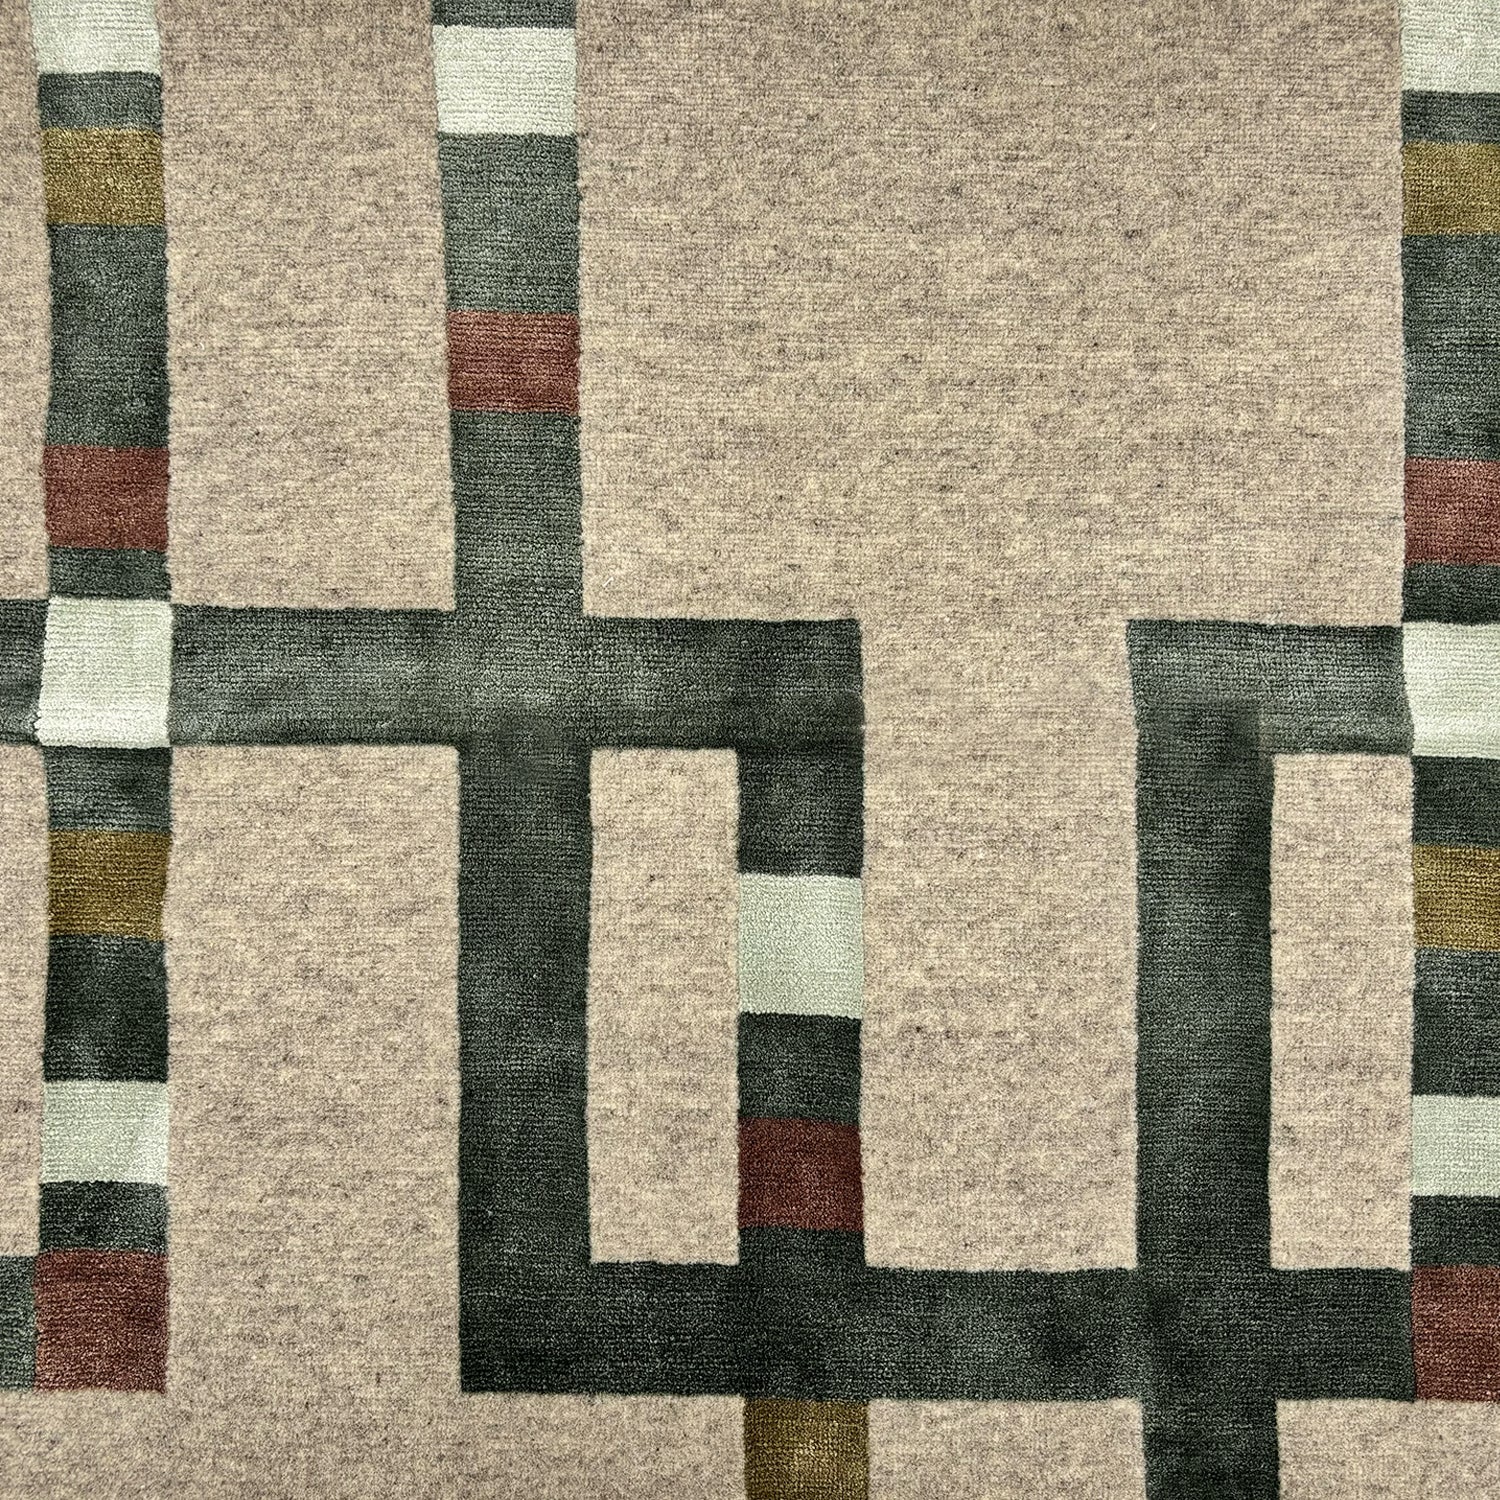 Detail of a handknotted rug with a minimlist geometric stripe pattern in shades of green agaist a brown field.